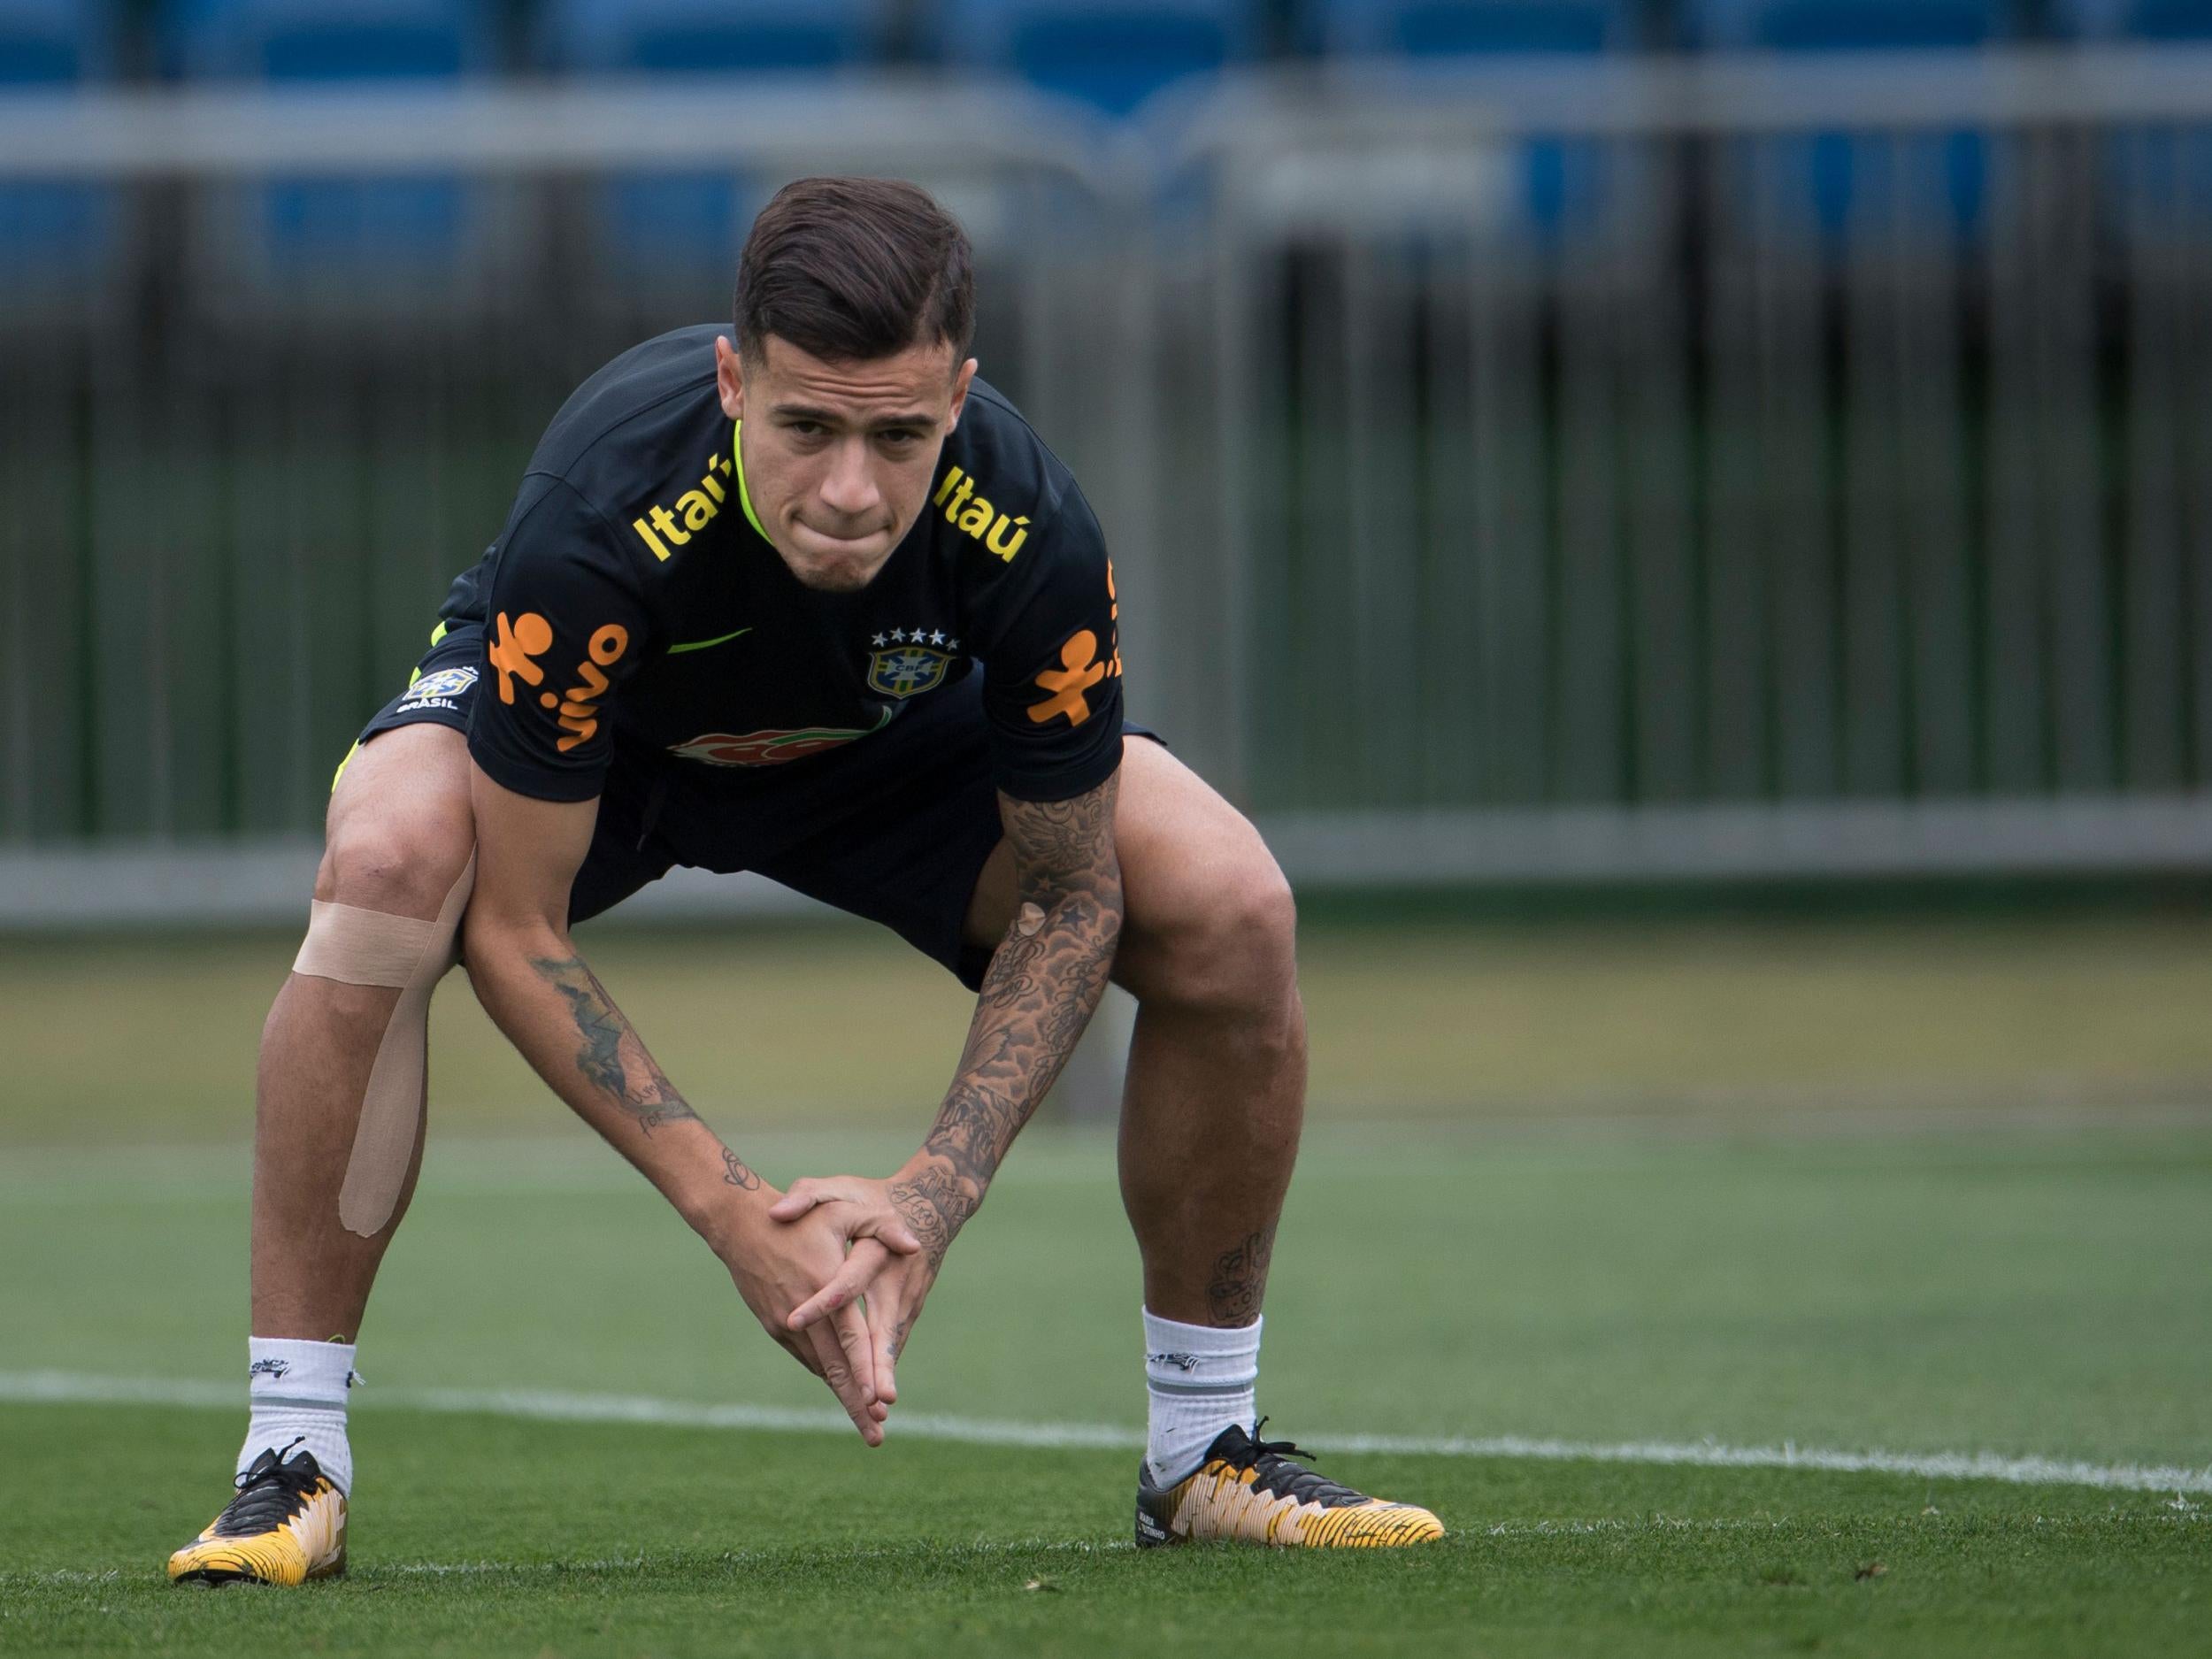 Liverpool are expected to hold firm in their refusal to sell Philippe Coutinho